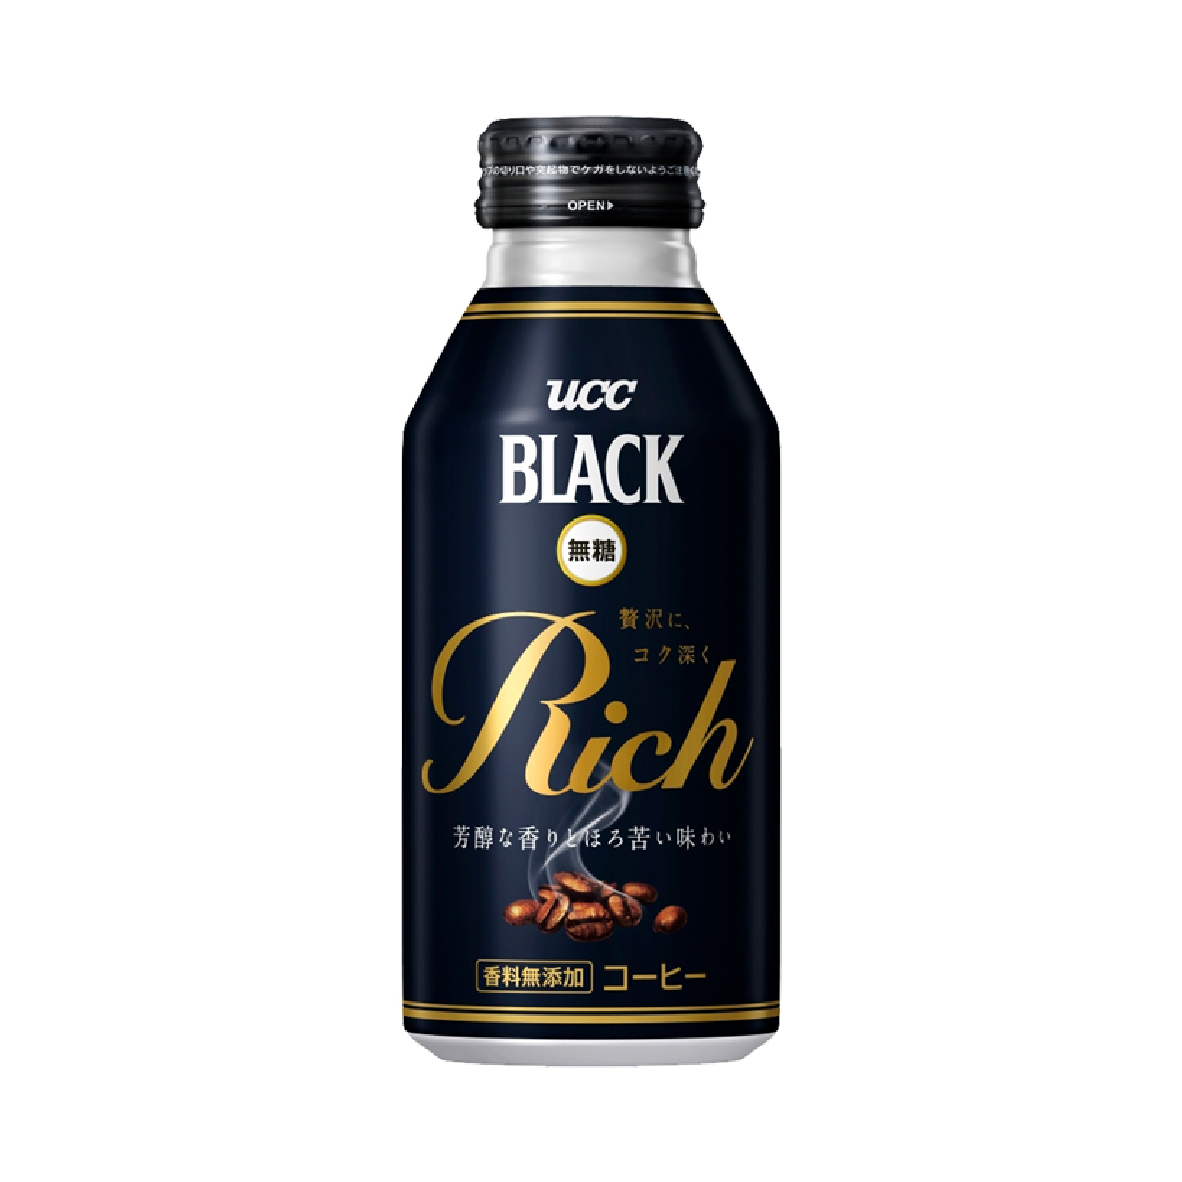 UCC Black Rich Canned Coffee